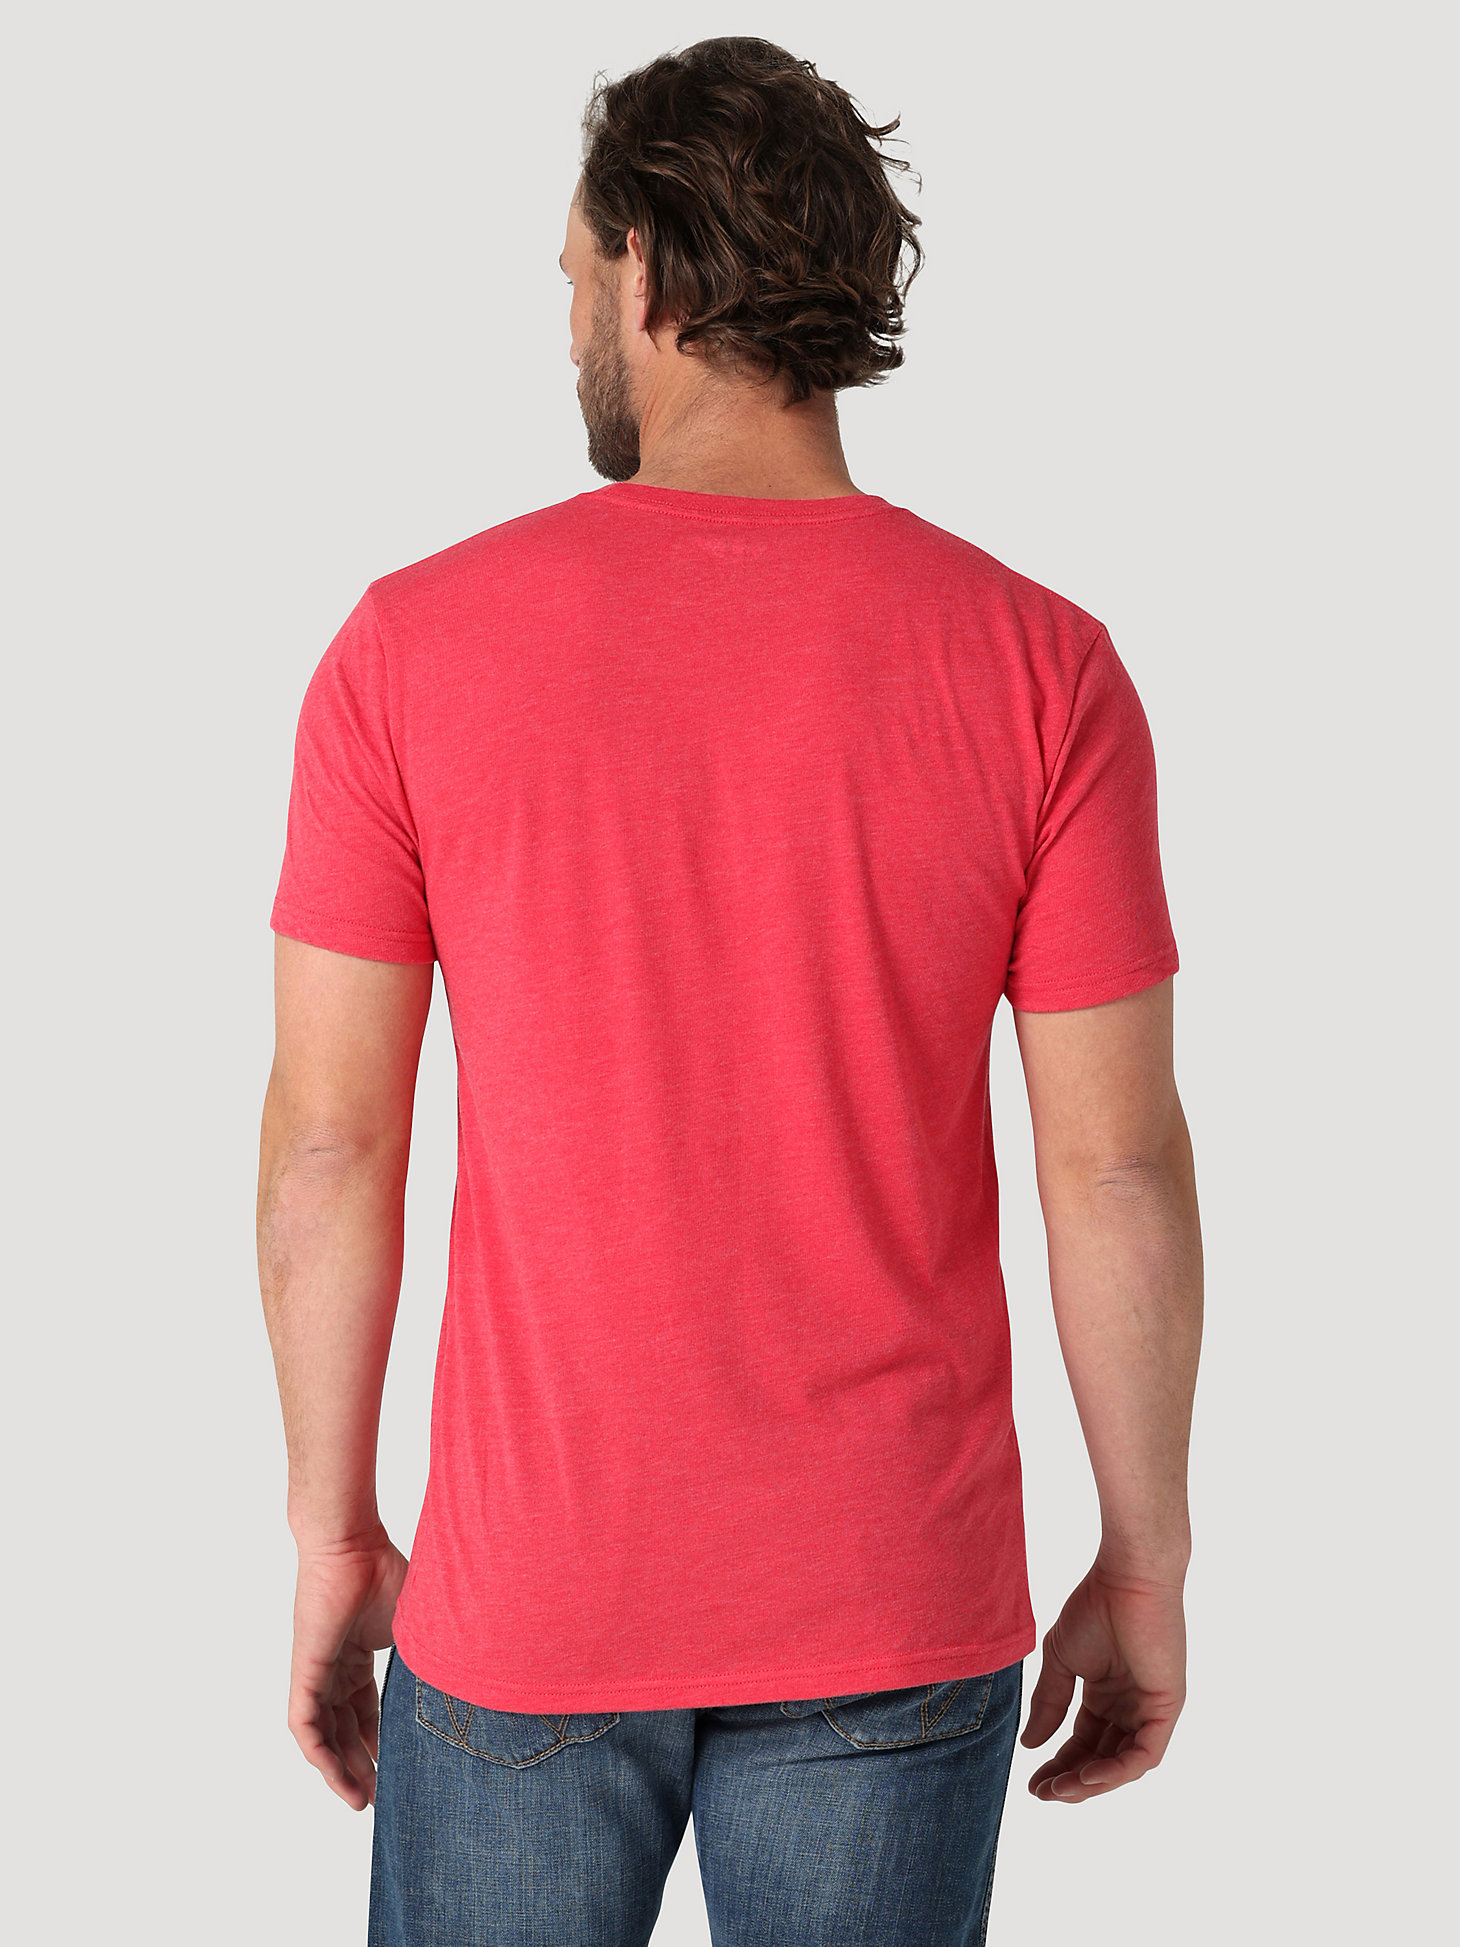 Men's Crafted with Pride T-Shirt in Red Heather alternative view 1